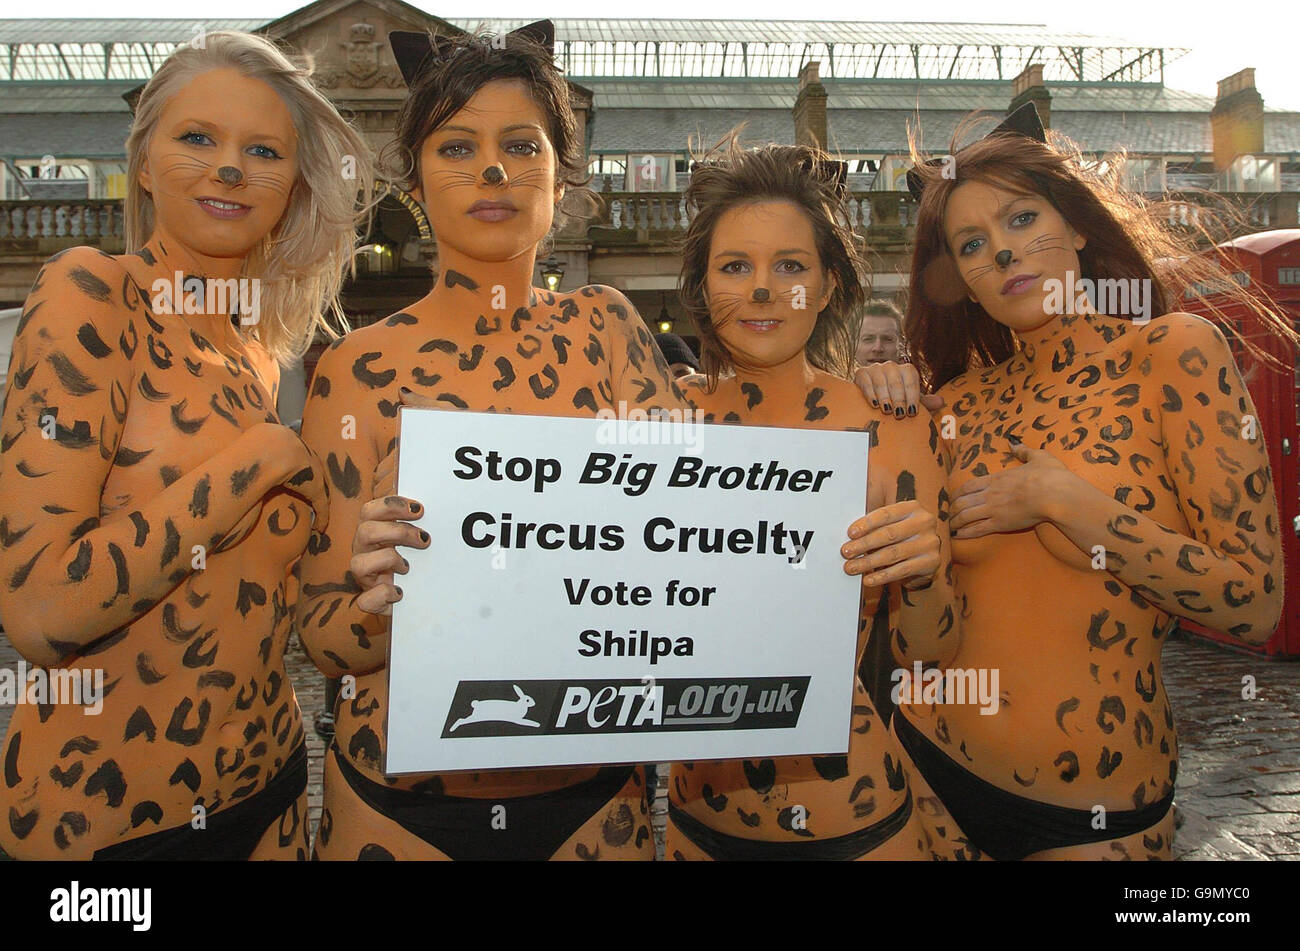 Celebrity Big Brother racism row. Members of animal charity Peta wearing nothing but body-painted leopard spots in Covent Garden, London. Stock Photo